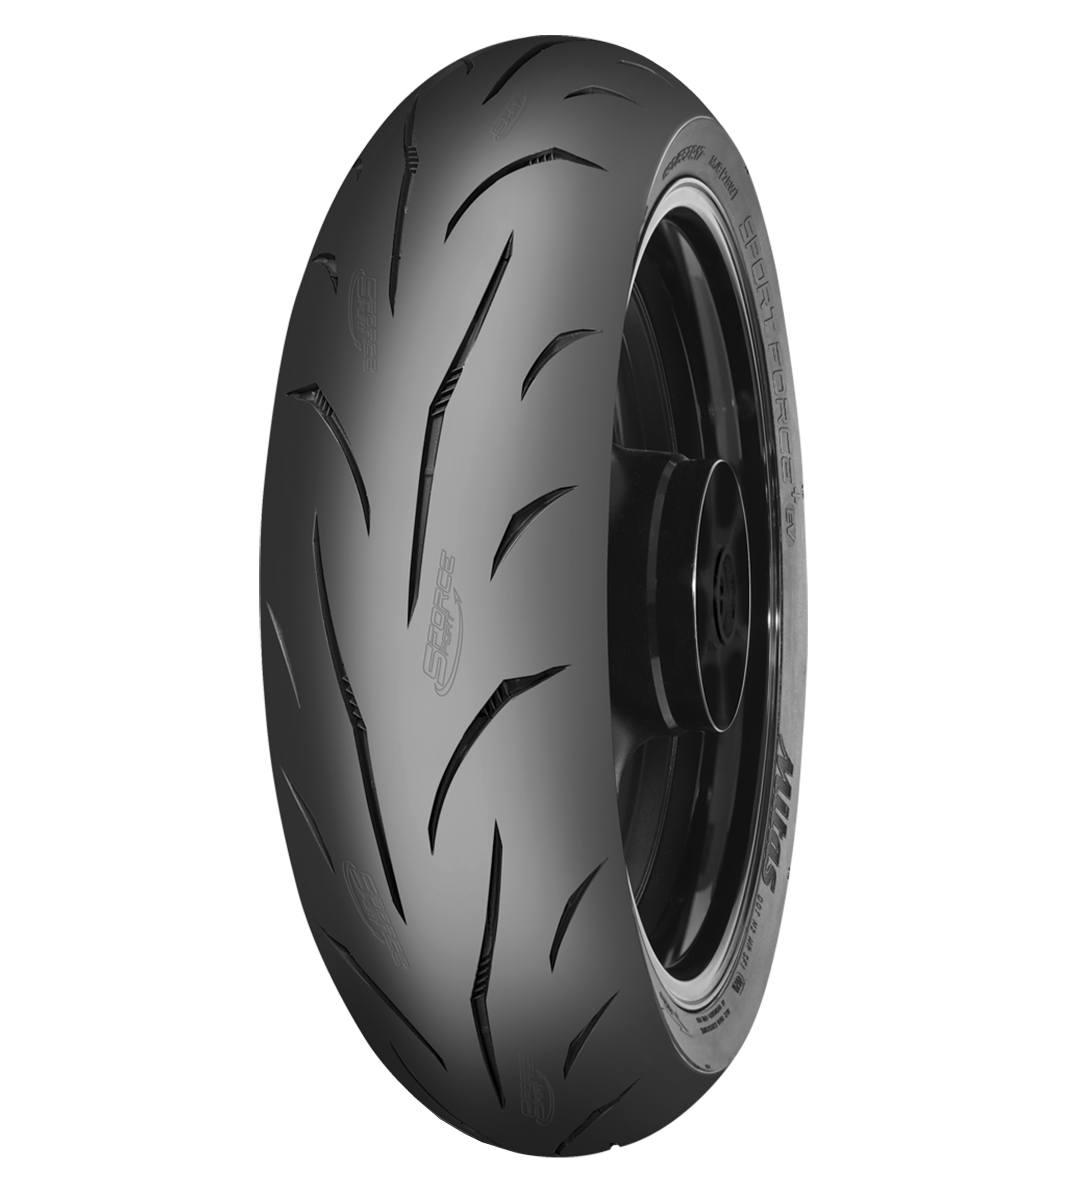 Mitas SPORT FORCE+ EV 180/55ZR17 Motorcycle Sport On-Road EVOLUTION (73W) No Stripe Tubeless Rear Tire, 603827, 180/55ZR17, Motorcycle Sport, On-Road, Rear, Sport, Sport Force+ EV, Sport Touring, Tires - Imported and distributed in North & South America by Lindeco Genuine Powersports - Premier Powersports Equipment and Accessories for Motorcycle Enthusiasts, Professional Riders and Dealers.